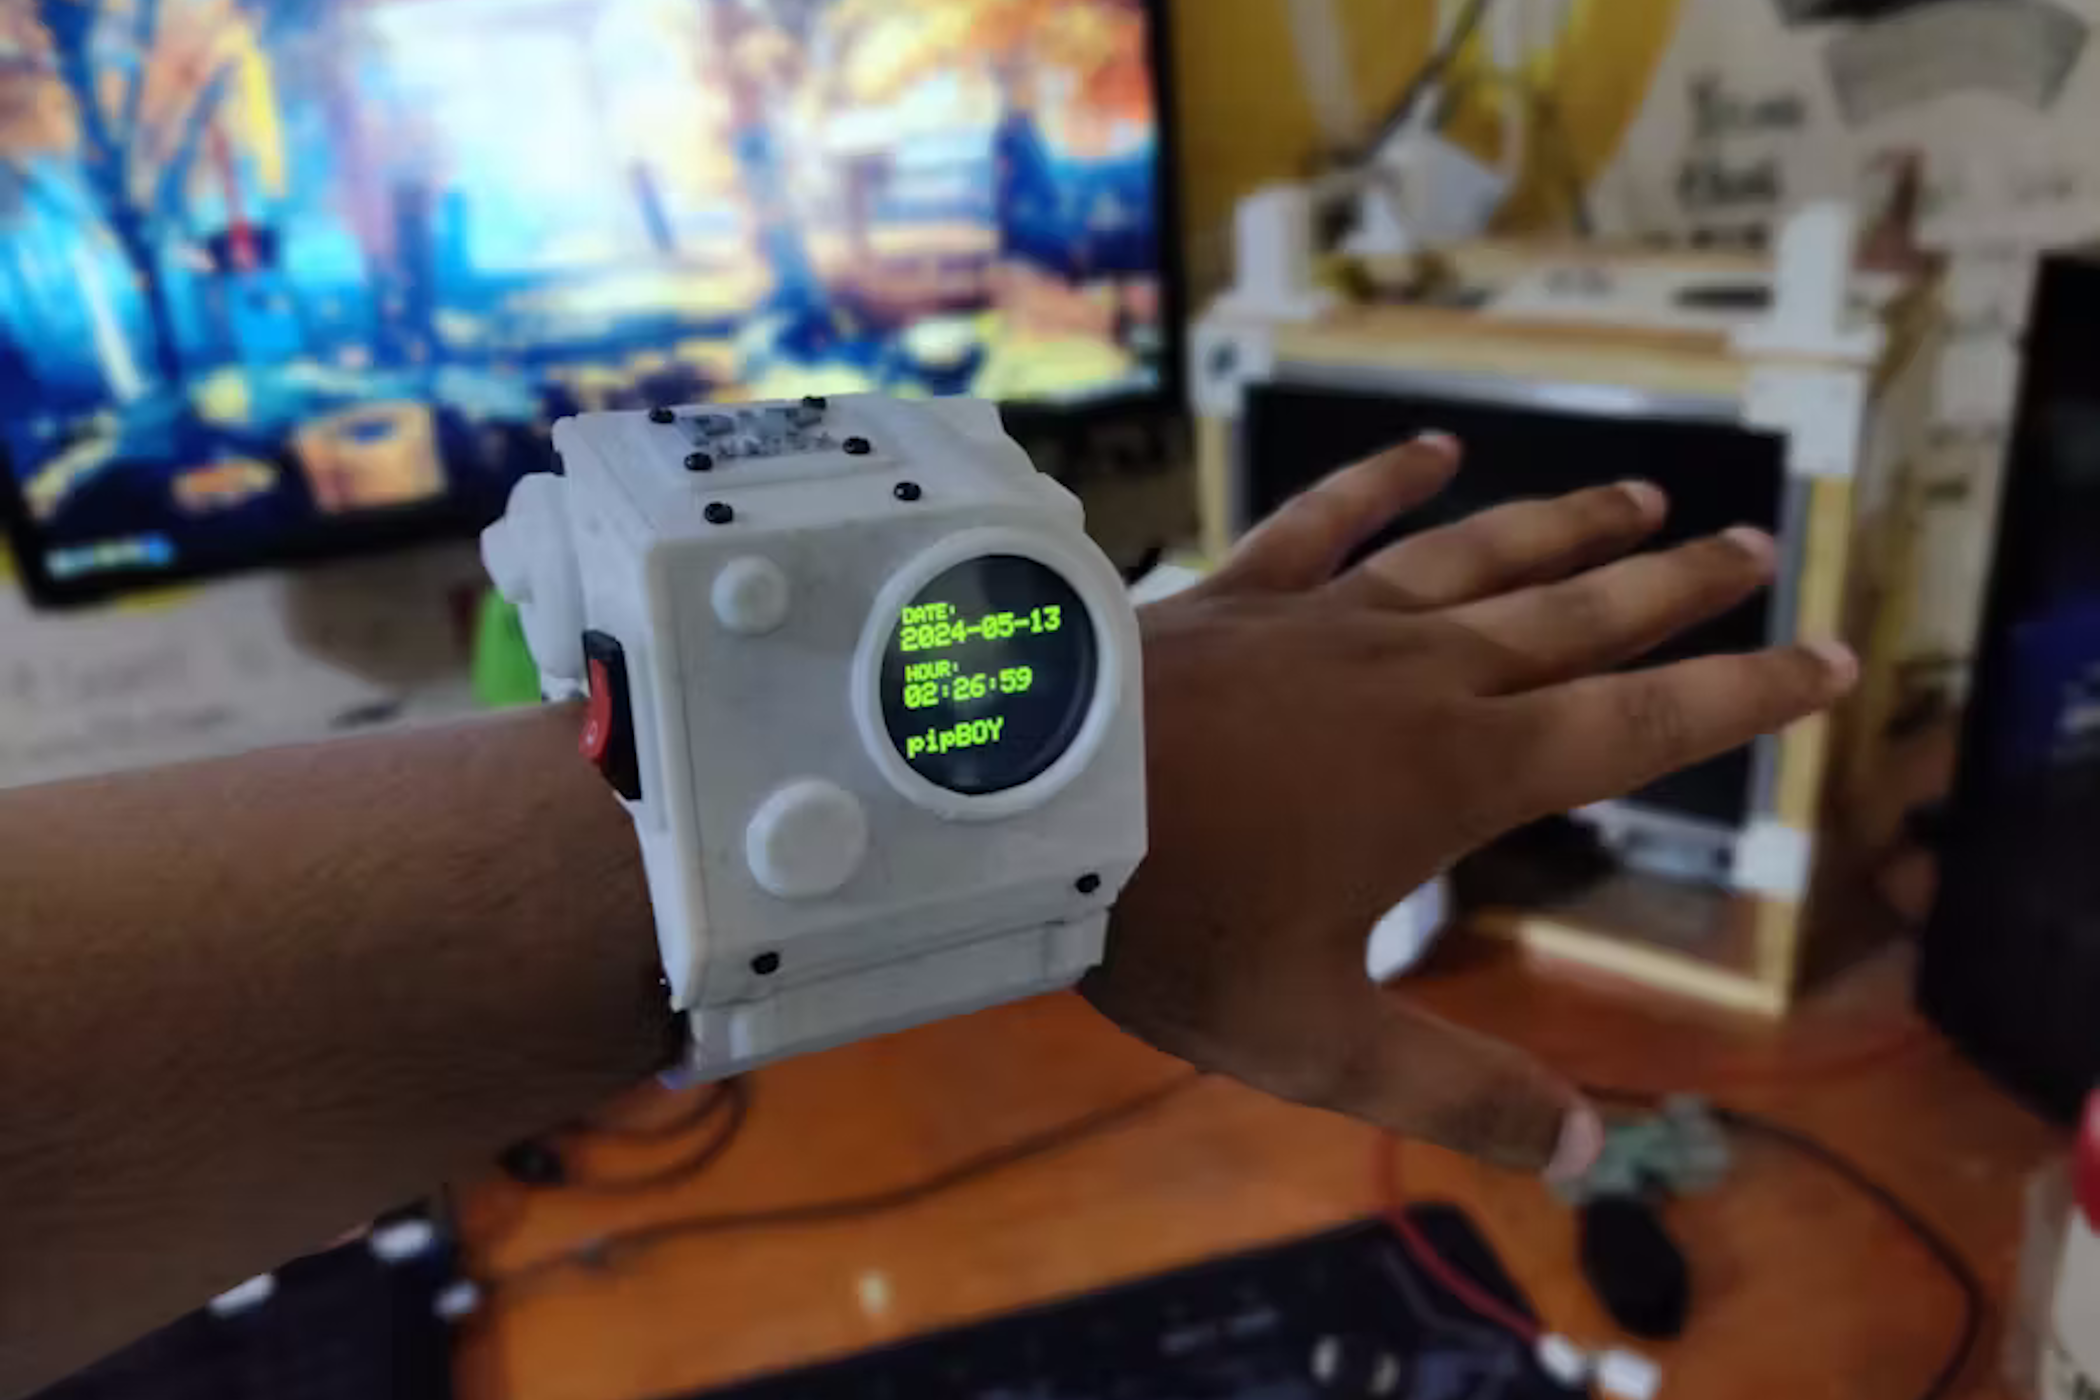 You can make this cool Fallout-inspired PipWatch for yourself